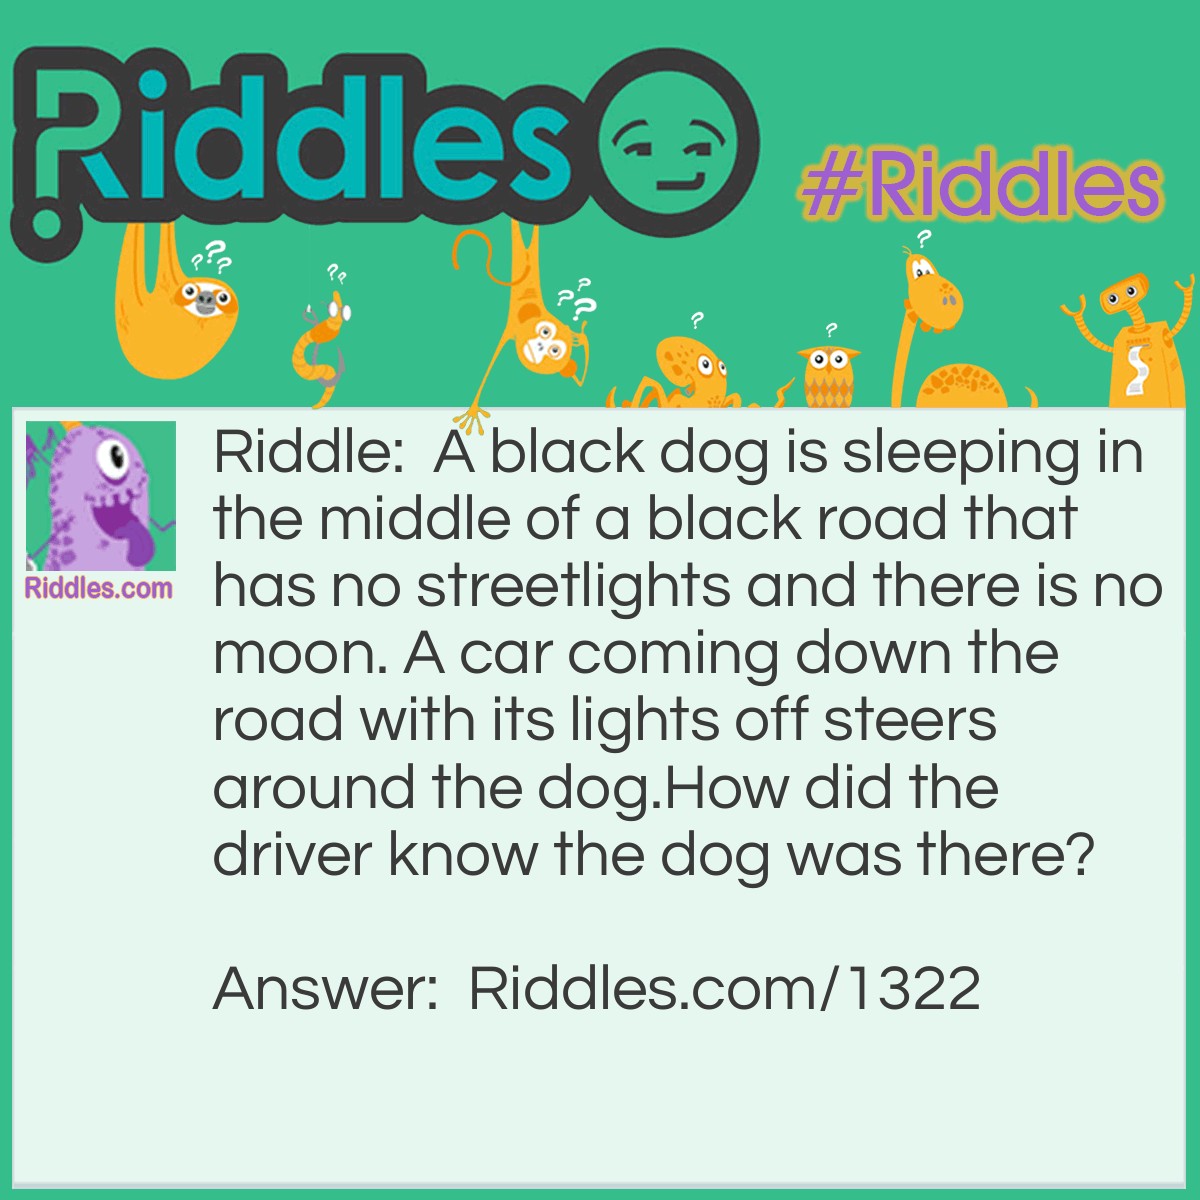 Riddle: A black dog is sleeping in the middle of a black road that has no streetlights and there is no moon. A car coming down the road with its lights off steers around the dog.
How did the driver know the dog was there? Answer: It was daytime